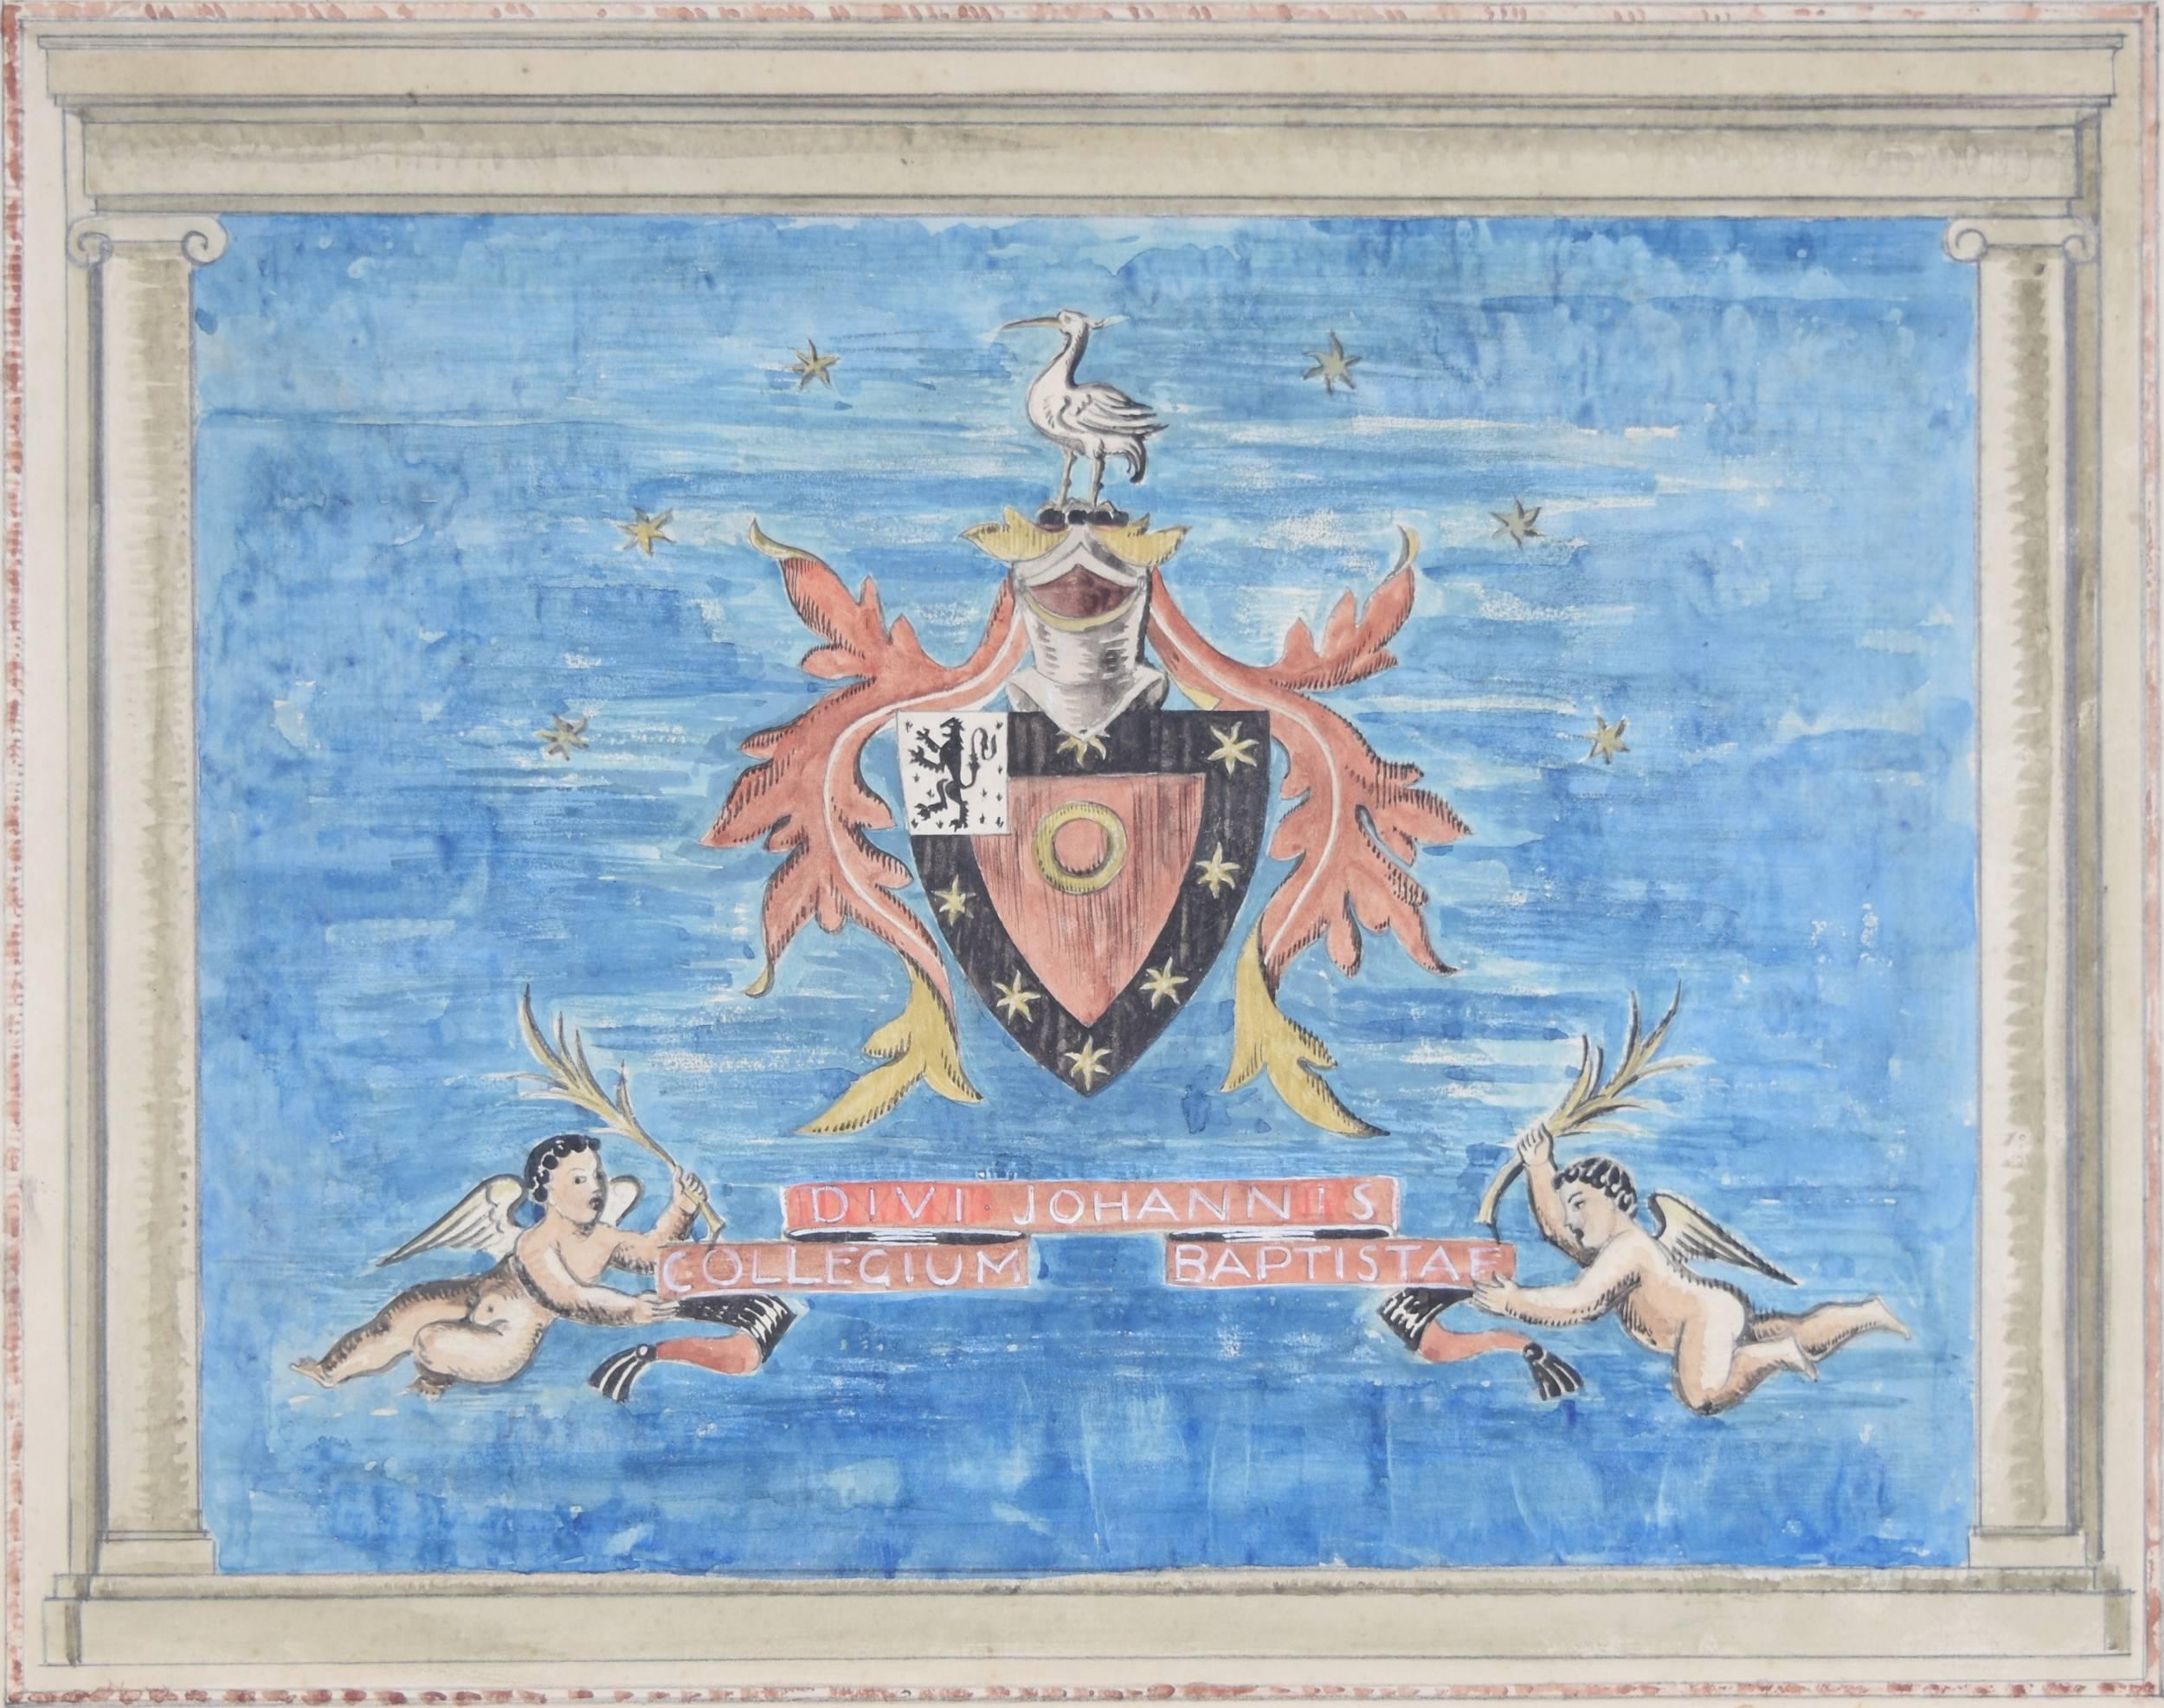 Sir Edward Brantwood Maufe KBE RA FRIBA (1883-1974)
Heraldic Design for a carpet for the Senior Common Room, St John’s College Oxford 
Watercolour and ink
Signed and inscribed
Provenance: The estate of Bernard Bumpus
37x46cm (14.5×18.1